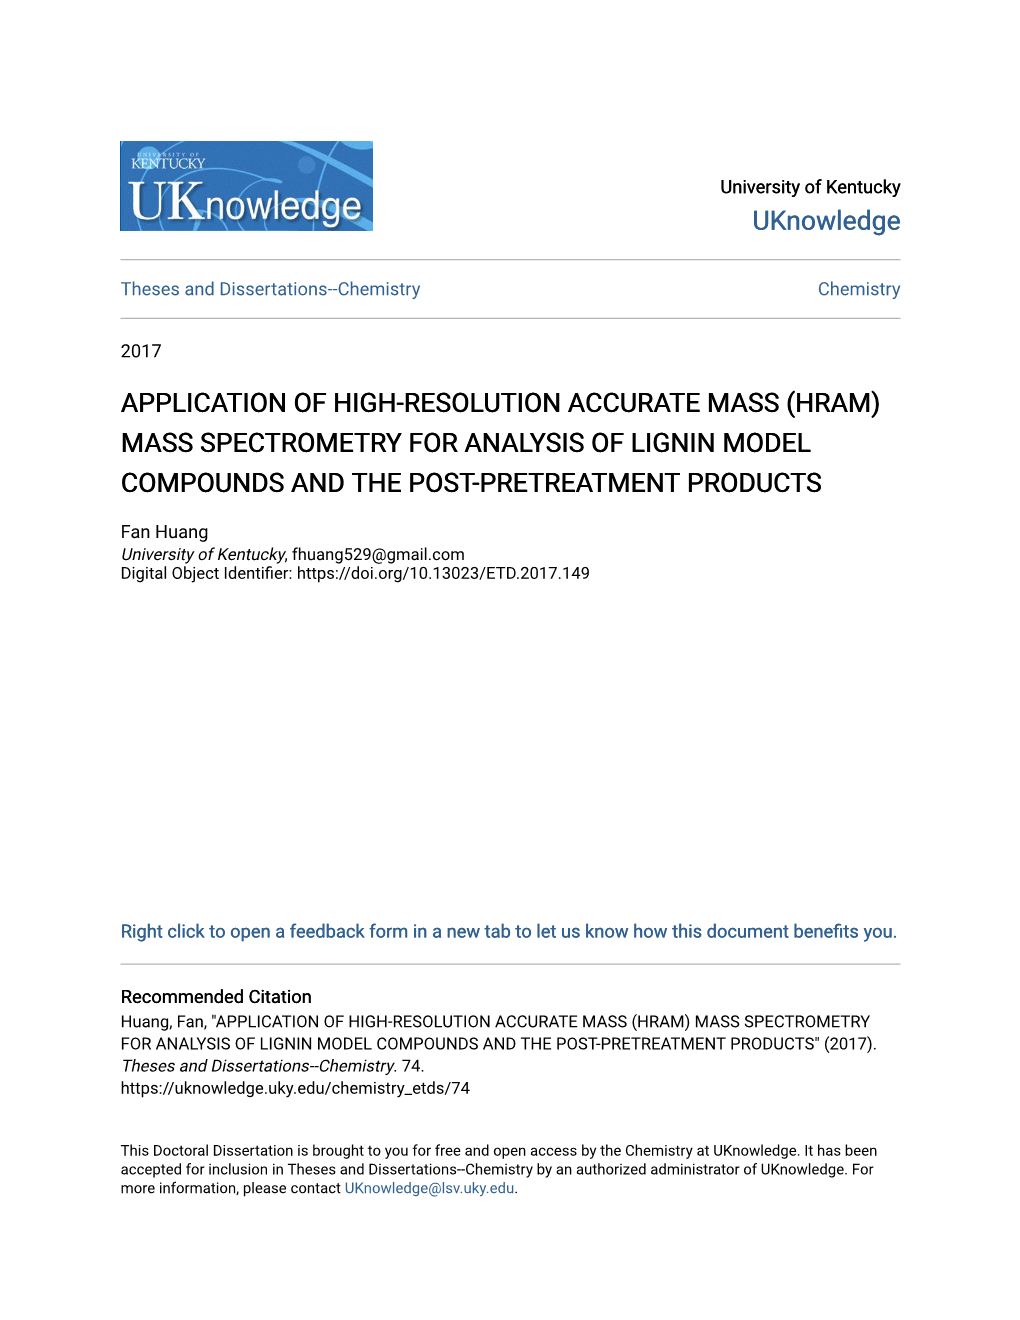 Mass Spectrometry for Analysis of Lignin Model Compounds and the Post-Pretreatment Products